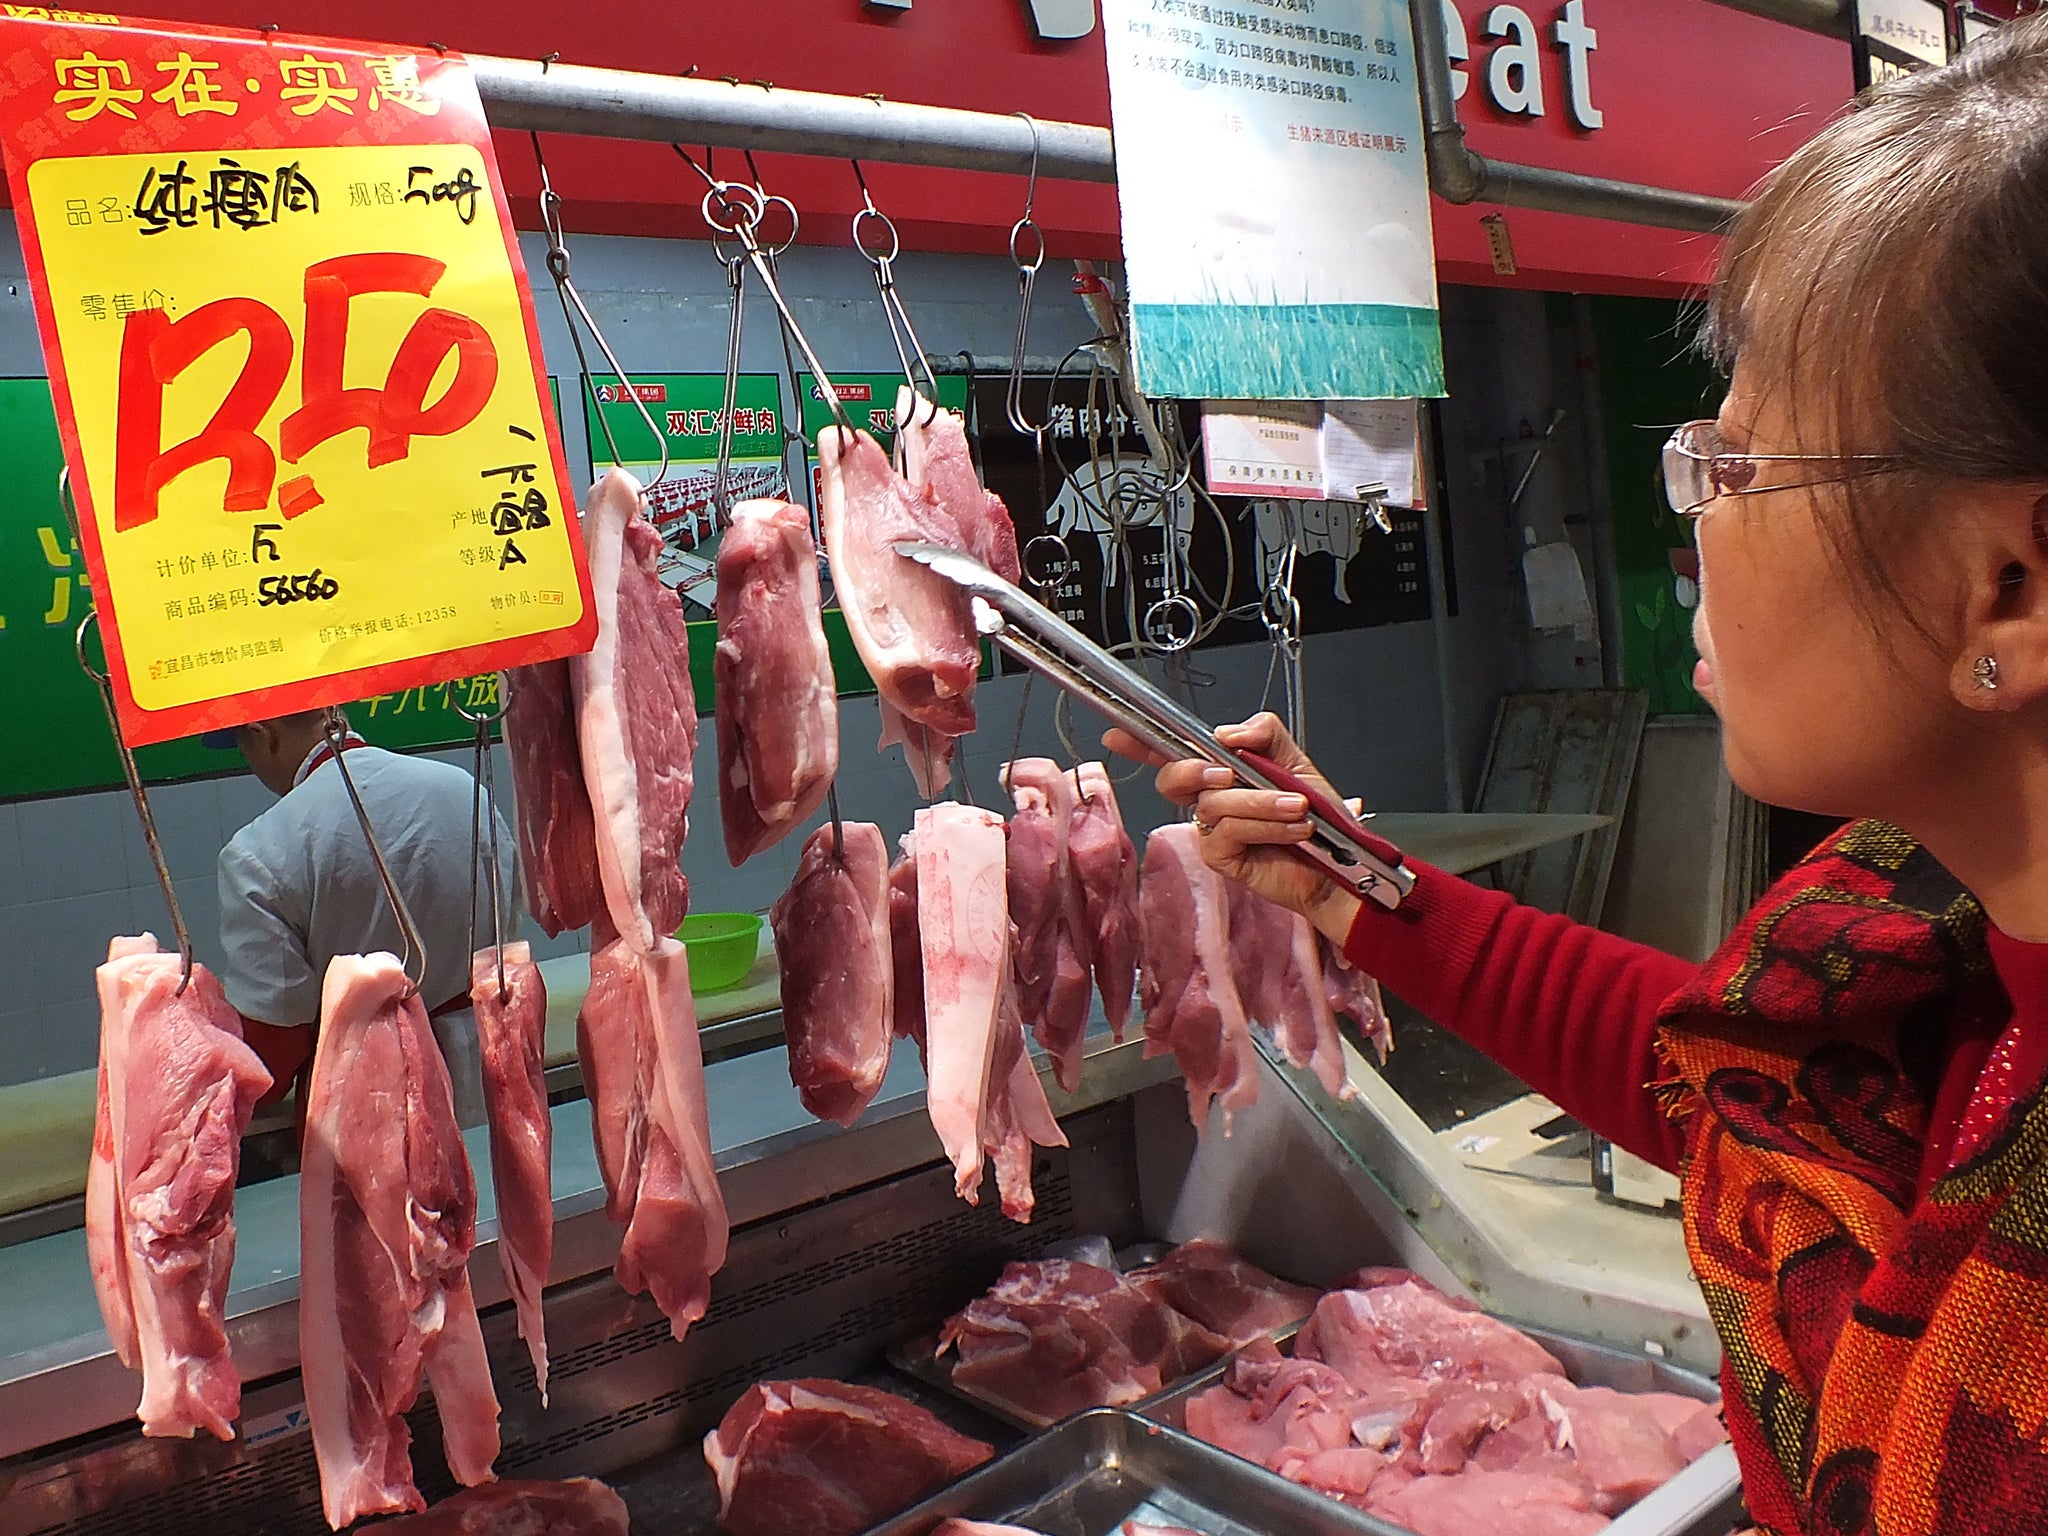 Pork consumption in China has doubled in the past two decades (Getty)